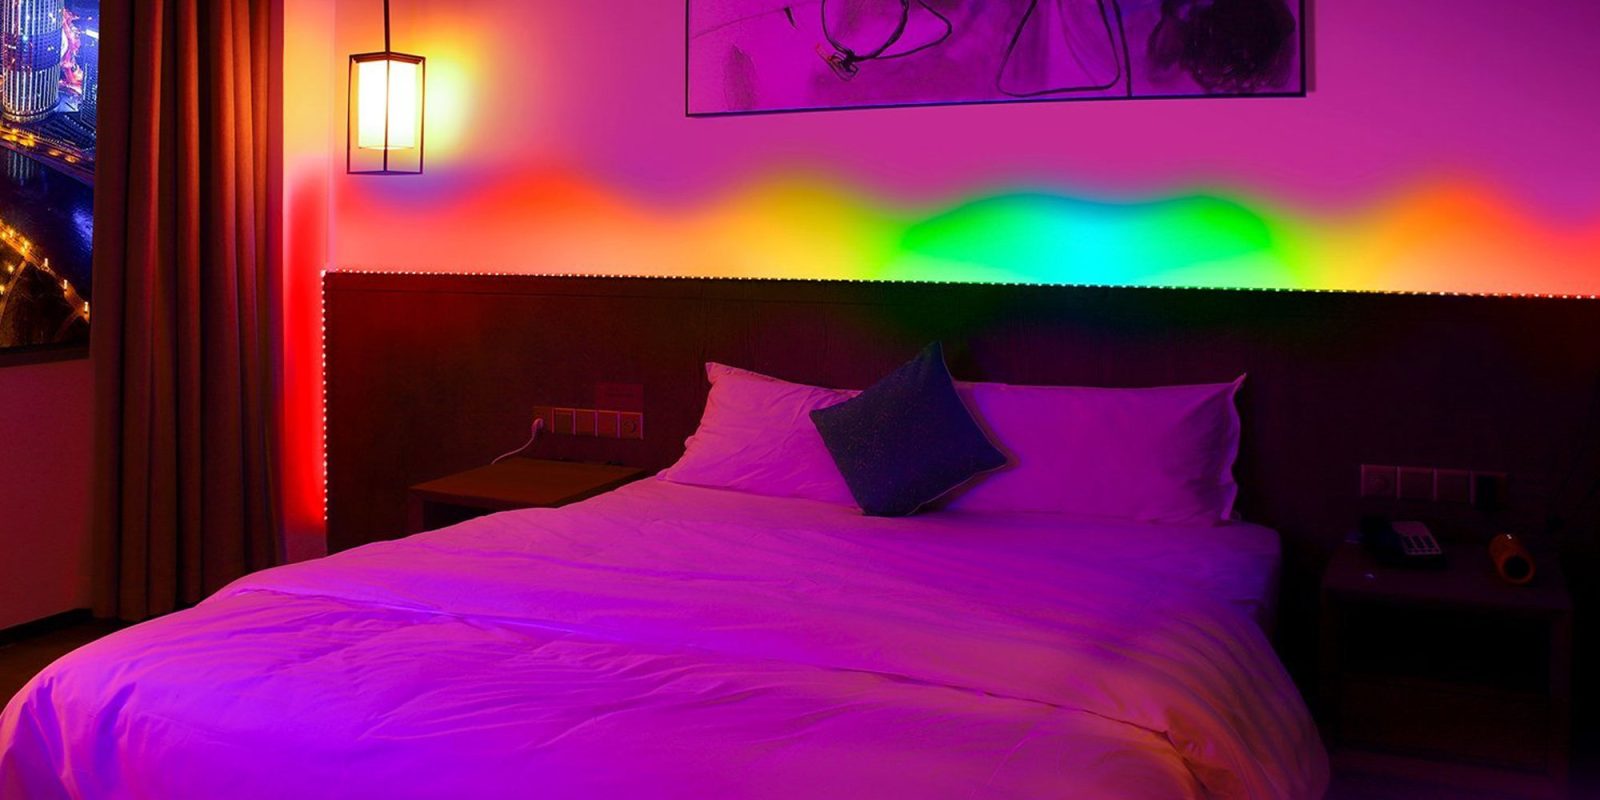 This 10 Prime Shipped Rgb Led Strip Is Waterproof Perfect